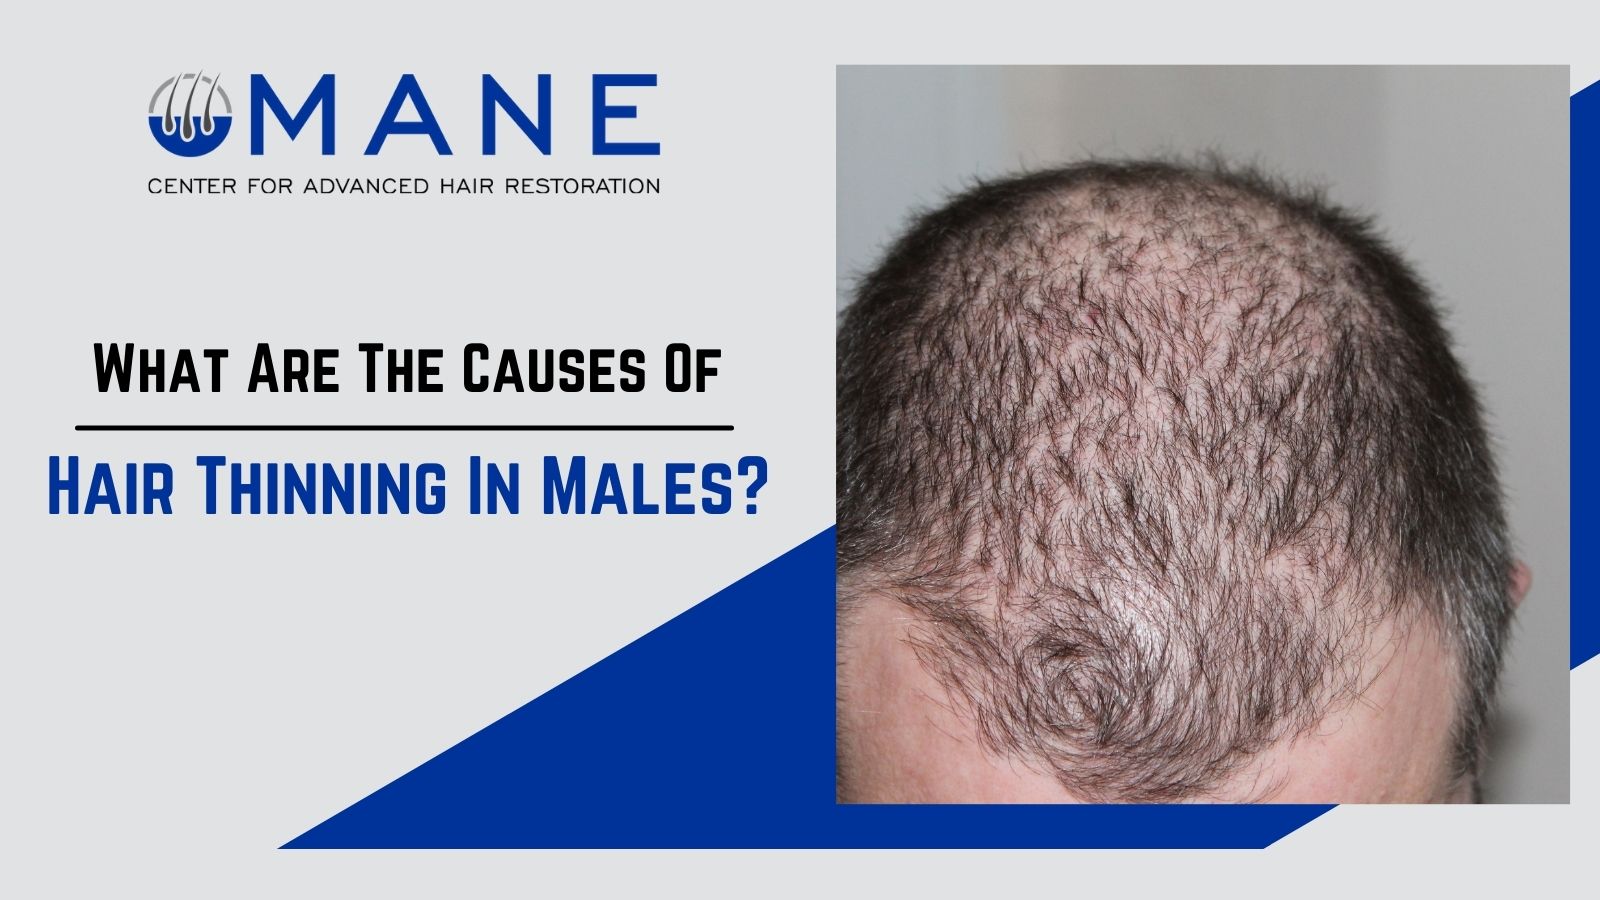 What Are The Causes Of Hair Thinning In Males?